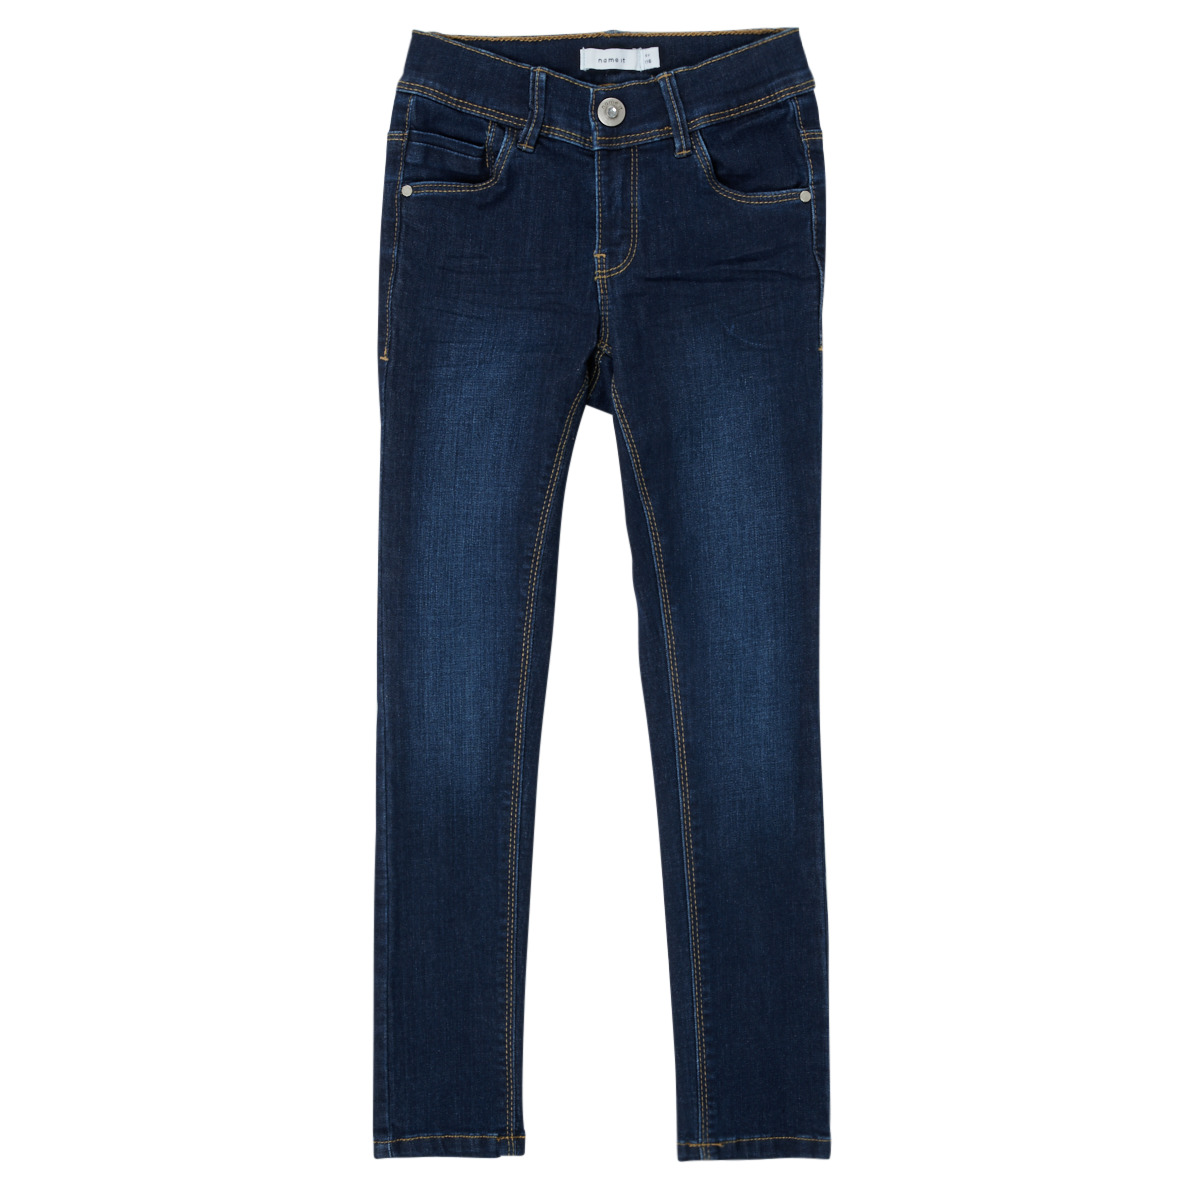 Name it NKFPOLLY DNMATASI - delivery NET Child Clothing slim ! jeans Blue Free Spartoo | 